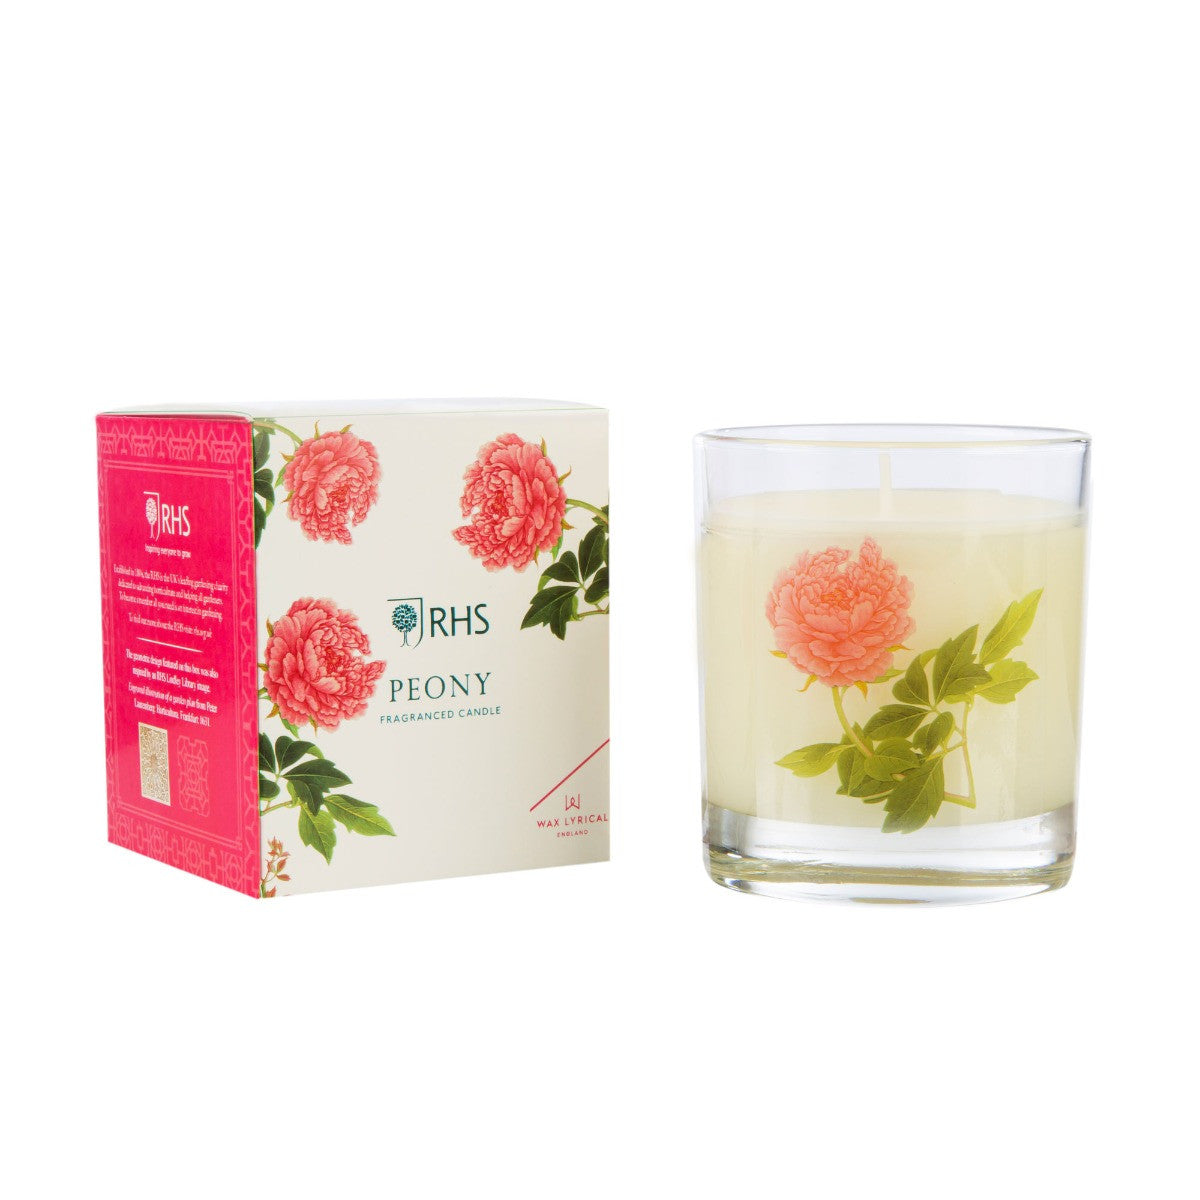 RHS Fragrant Garden Peony Candle by Wax Lyrical. Made in England.